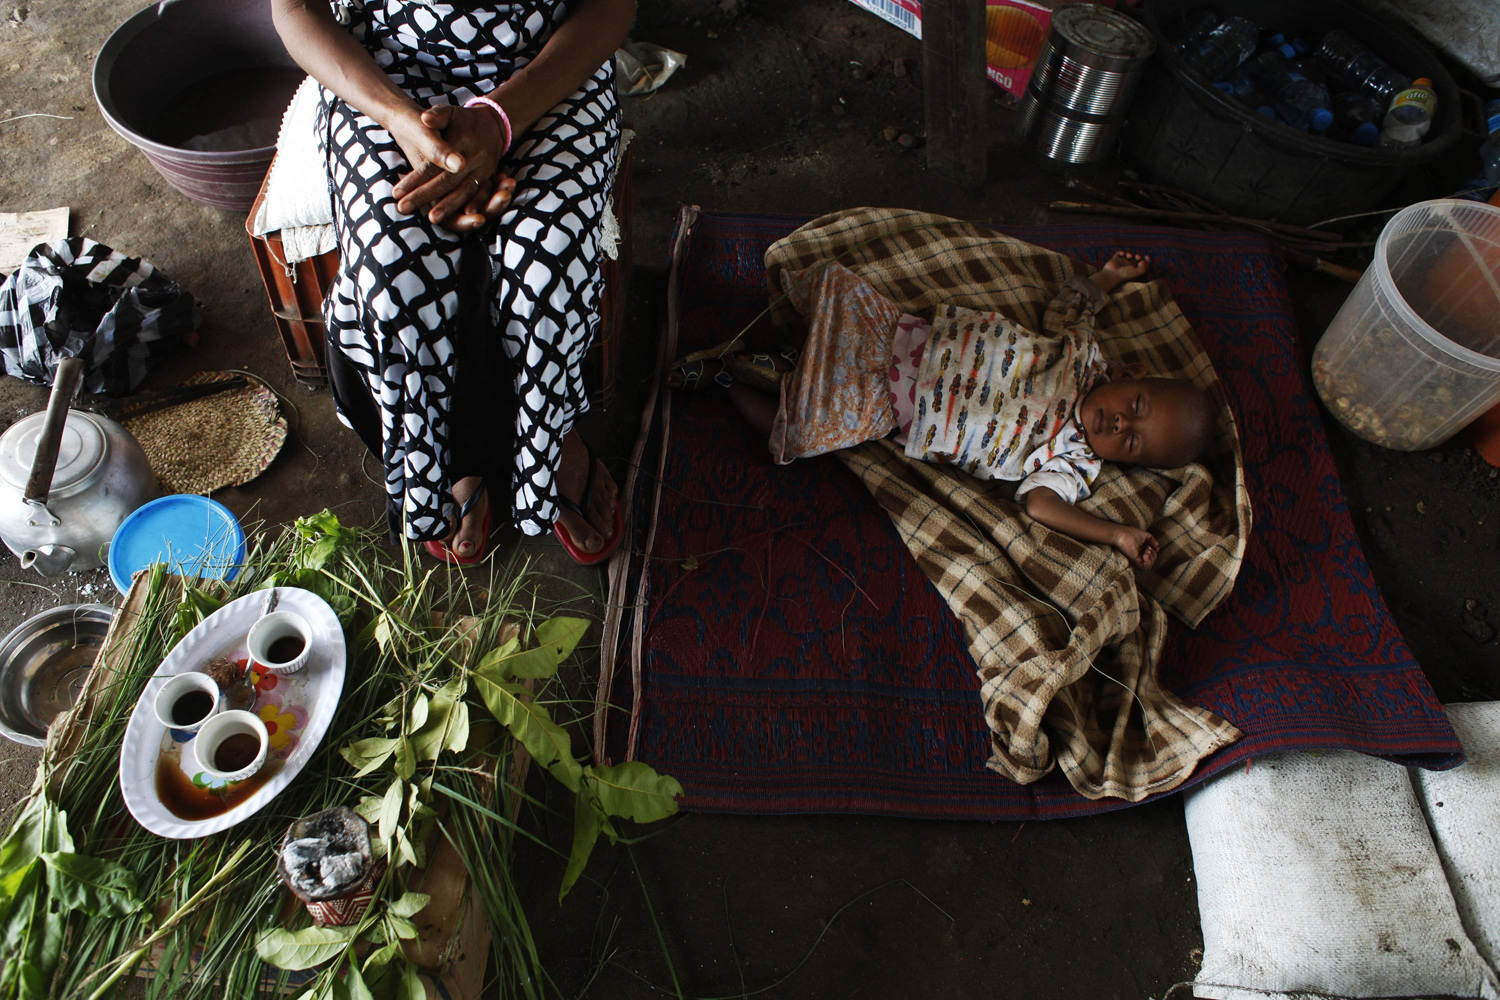 An Eritrean baby refugee sleeps on the floor by his mother in a tent inside the UN House IDP camp in Juba